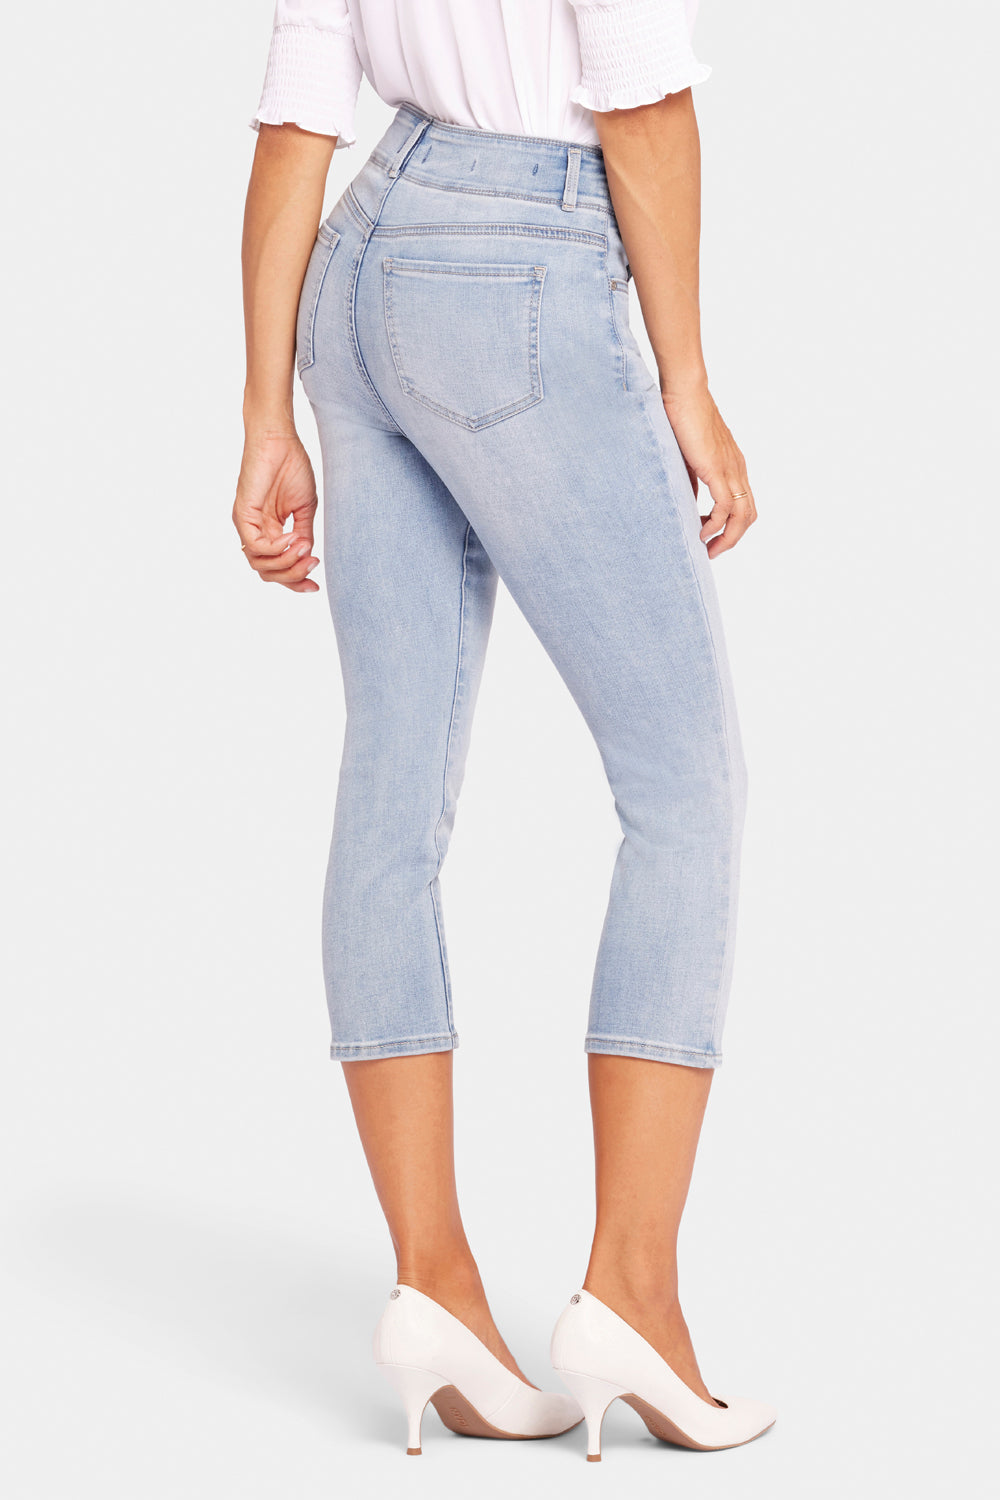 NYDJ Ami Skinny Capri Jeans With High Rise - Afterglow